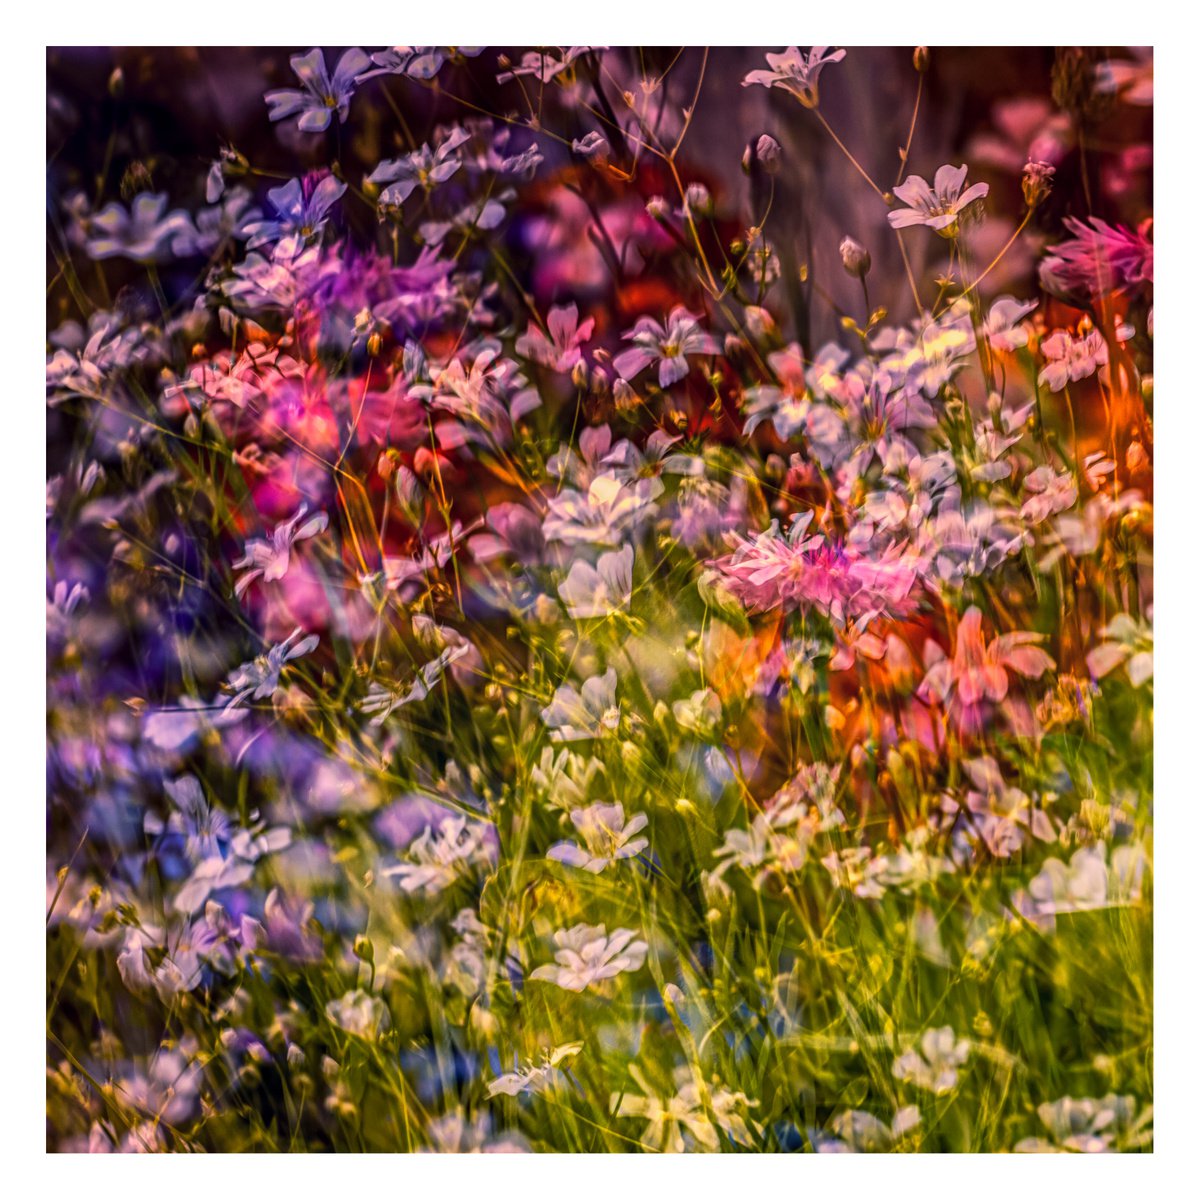 Summer Meadows #8. Limited Edition 1/25 12x12 inch Abstract Photographic Print. by Graham Briggs